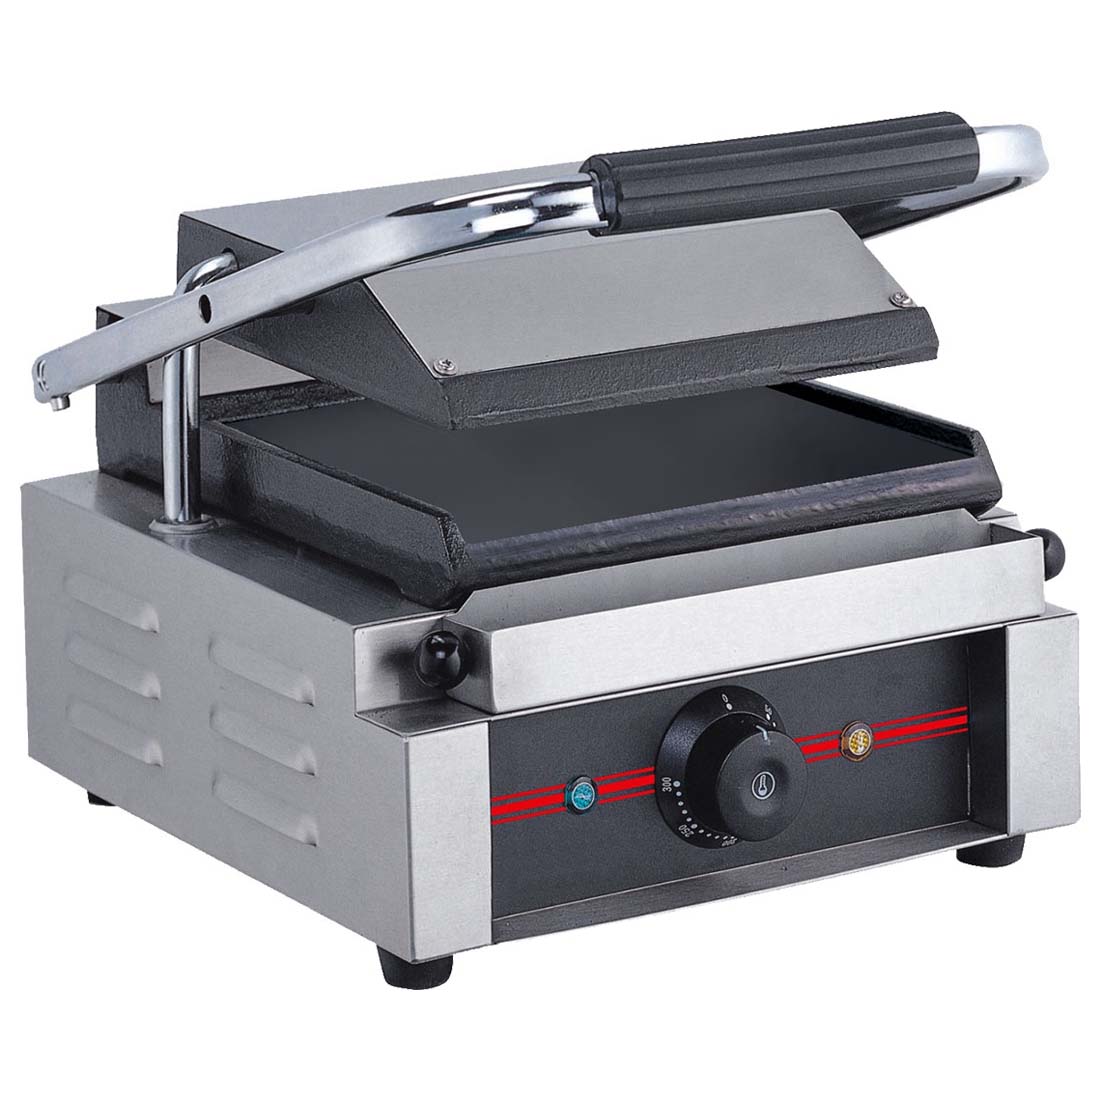 GH-811E Large Single Contact Grill